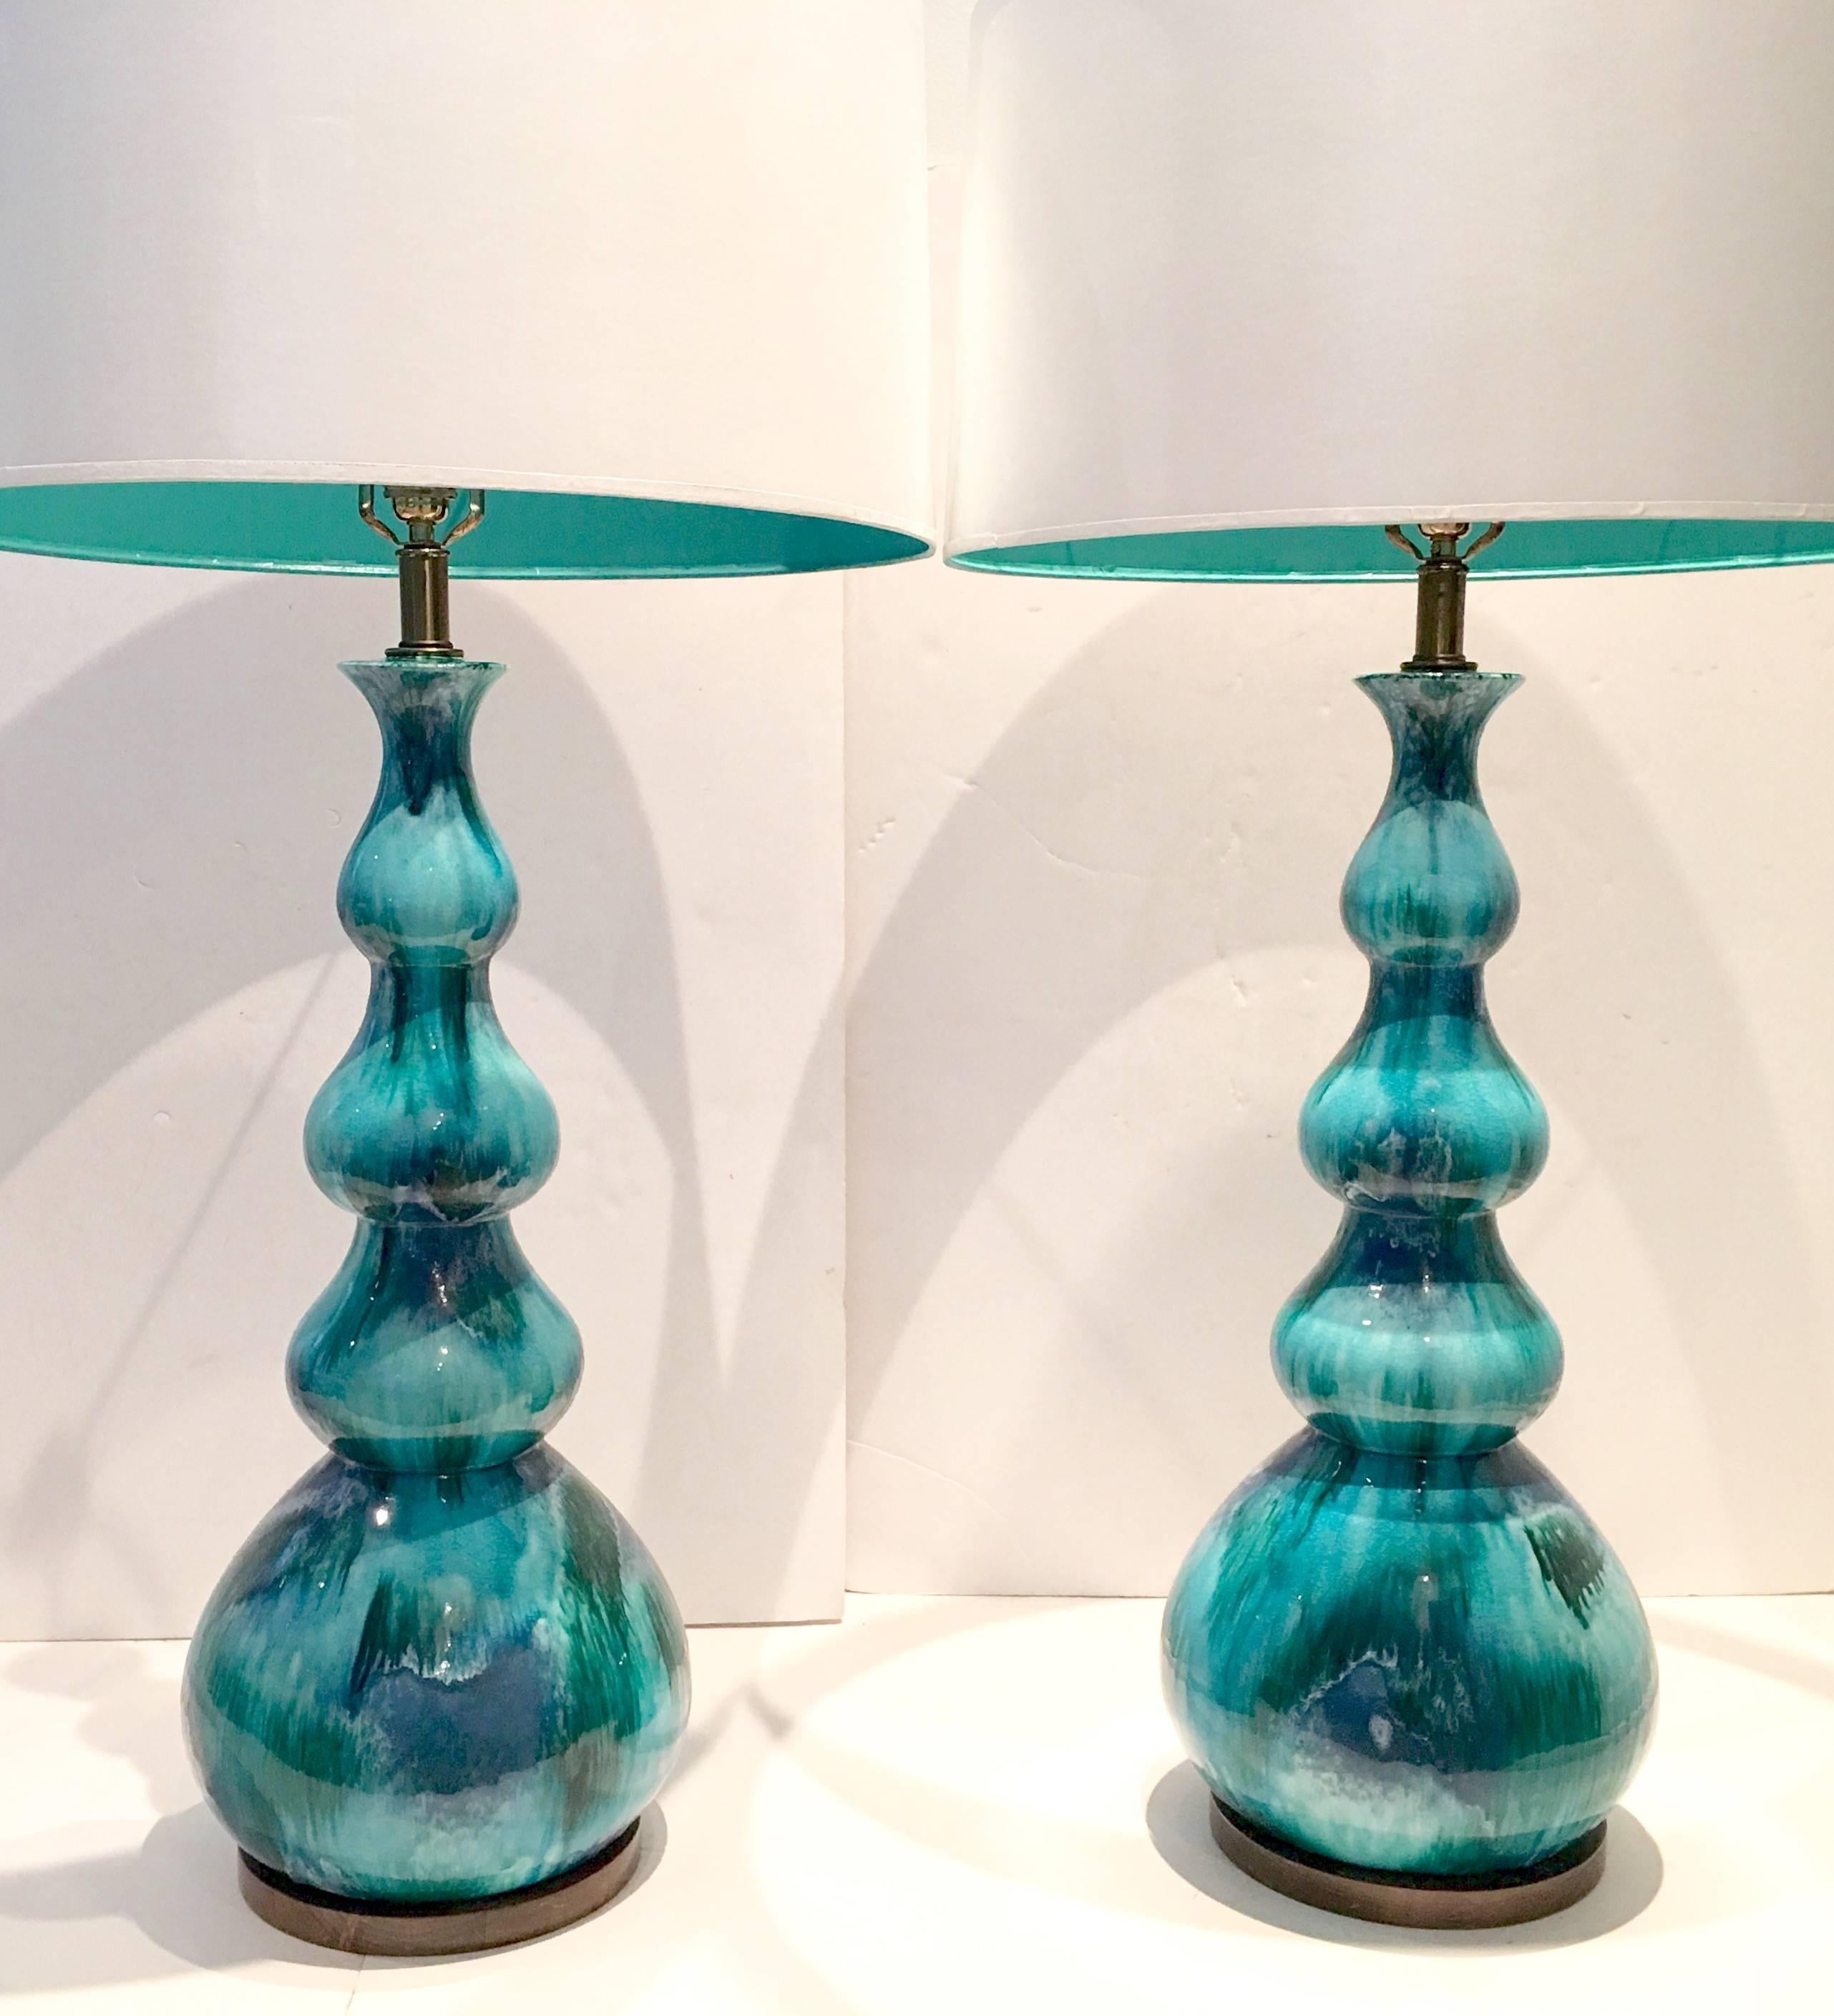 A Fine Pair Of Italian Turquoise Ceramic Glaze Four Gourd Form Tall Table Lamps Features  Vibrant turquoise with navy blue and kelly green tones, original walnut base and brass fittings. 
Wired for the US and in working order. Takes a single